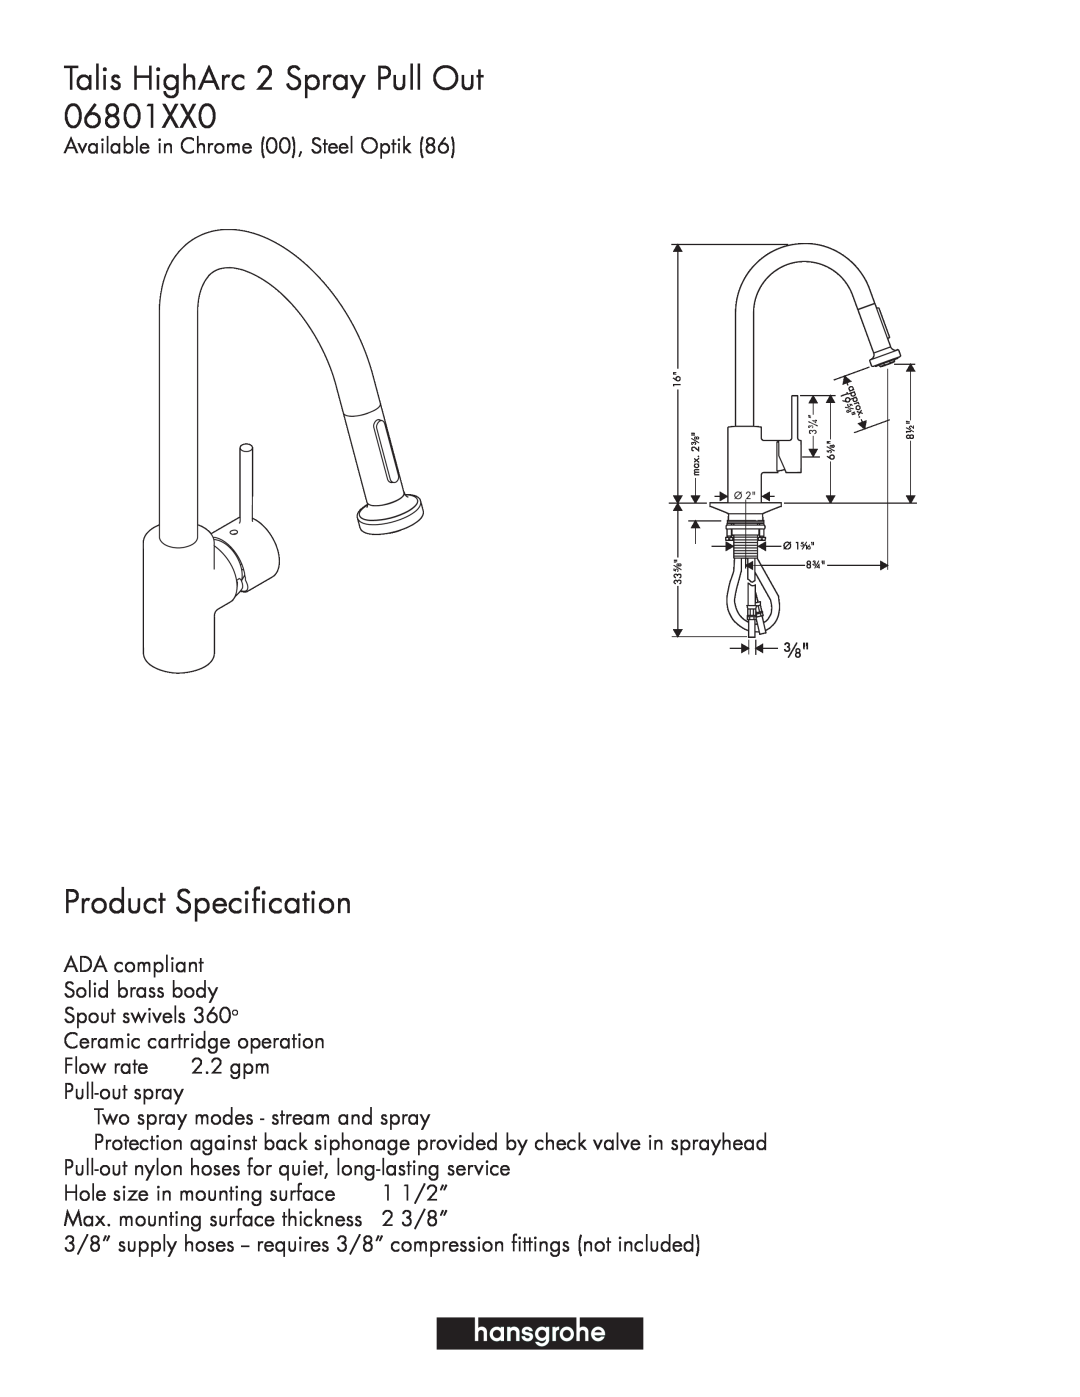 Hans Grohe 06801XX0 manual Talis HighArc 2 Spray Pull Out, Product Specification 